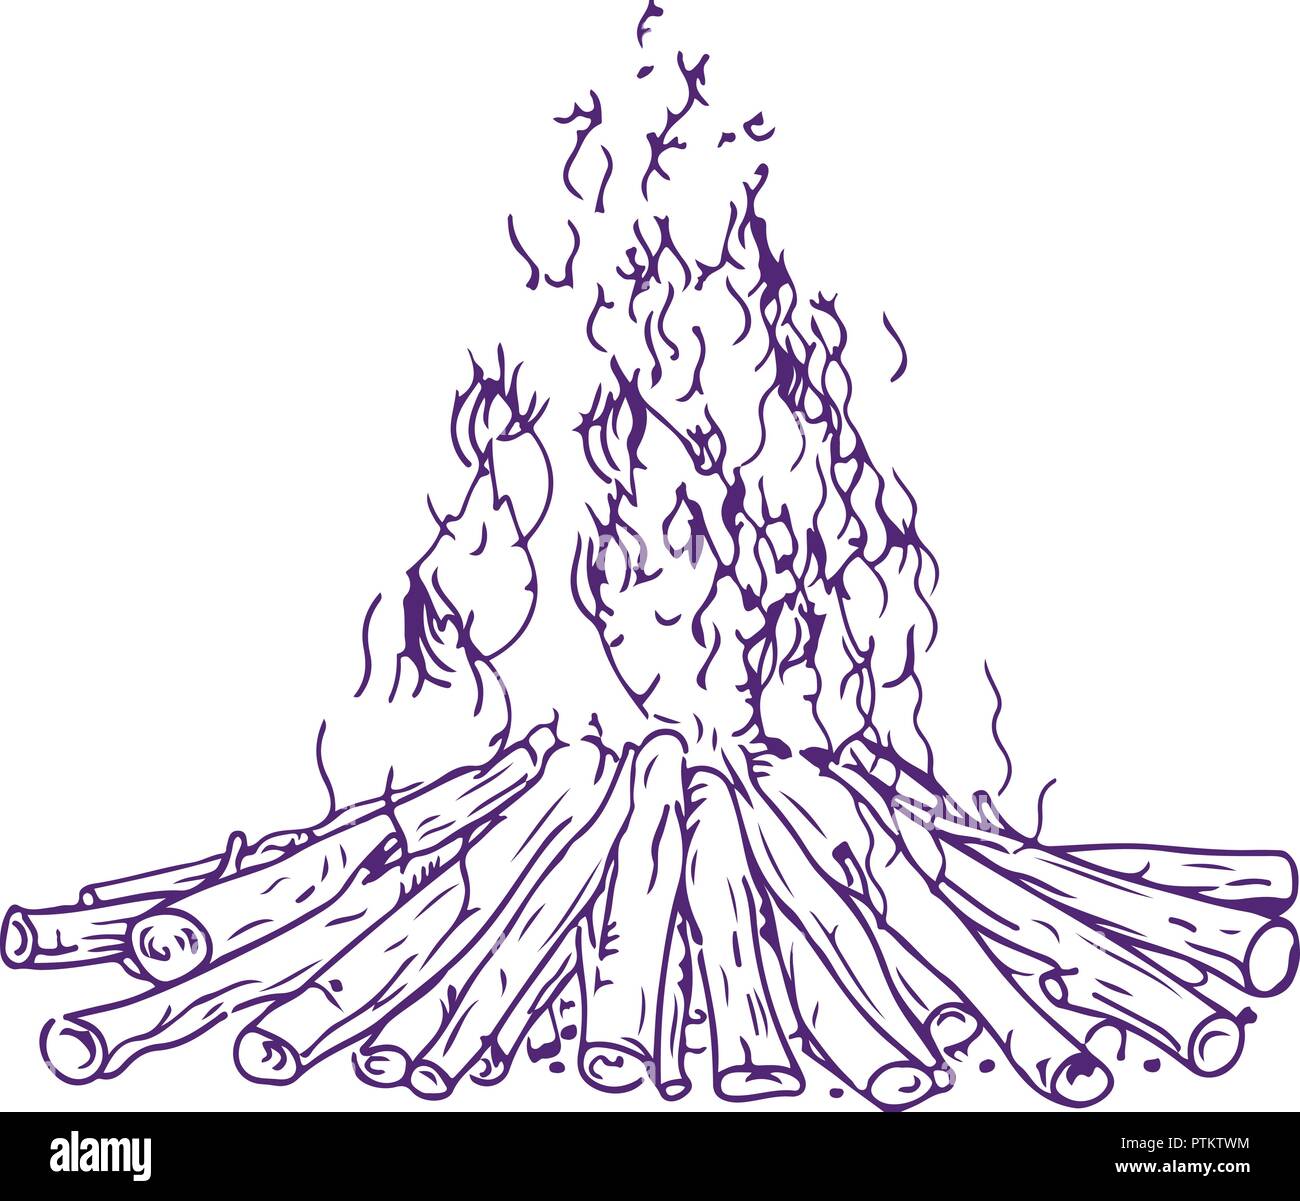 Drawing sketch style illustration of a bonfire or campfire with firewood burning on fire on isolated background. Stock Vector